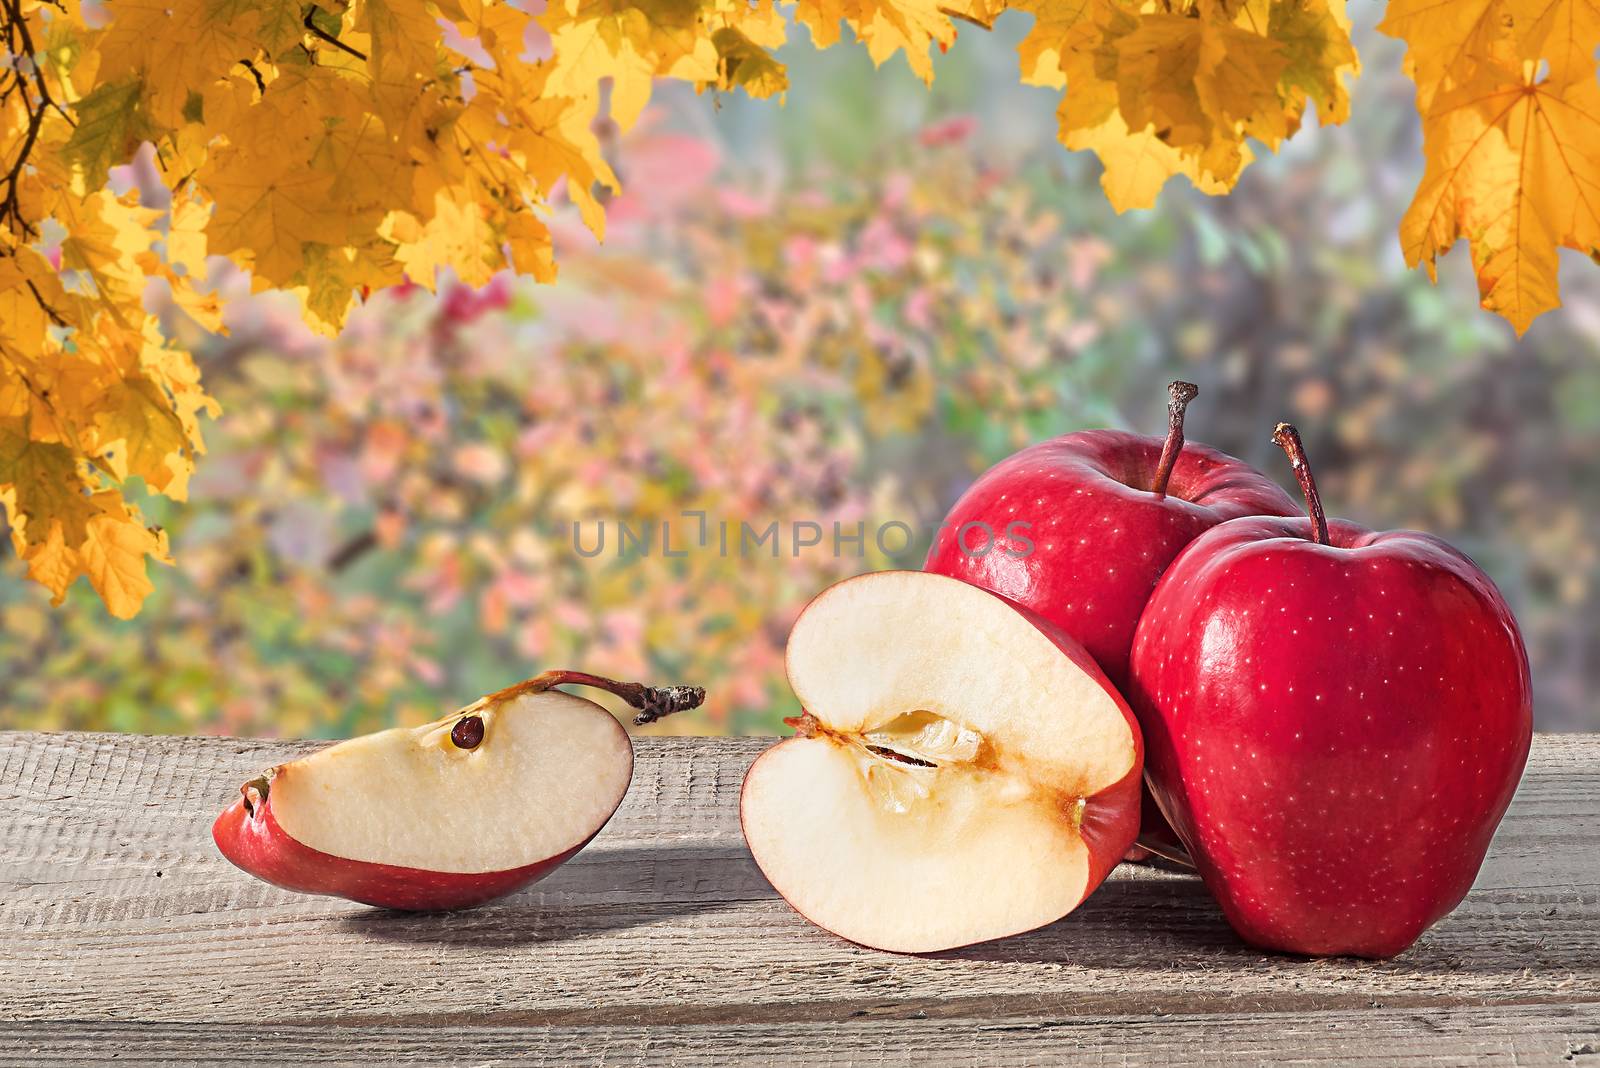 Several apples on a wooden table. Blurred background. Half and a quarter of an apple.